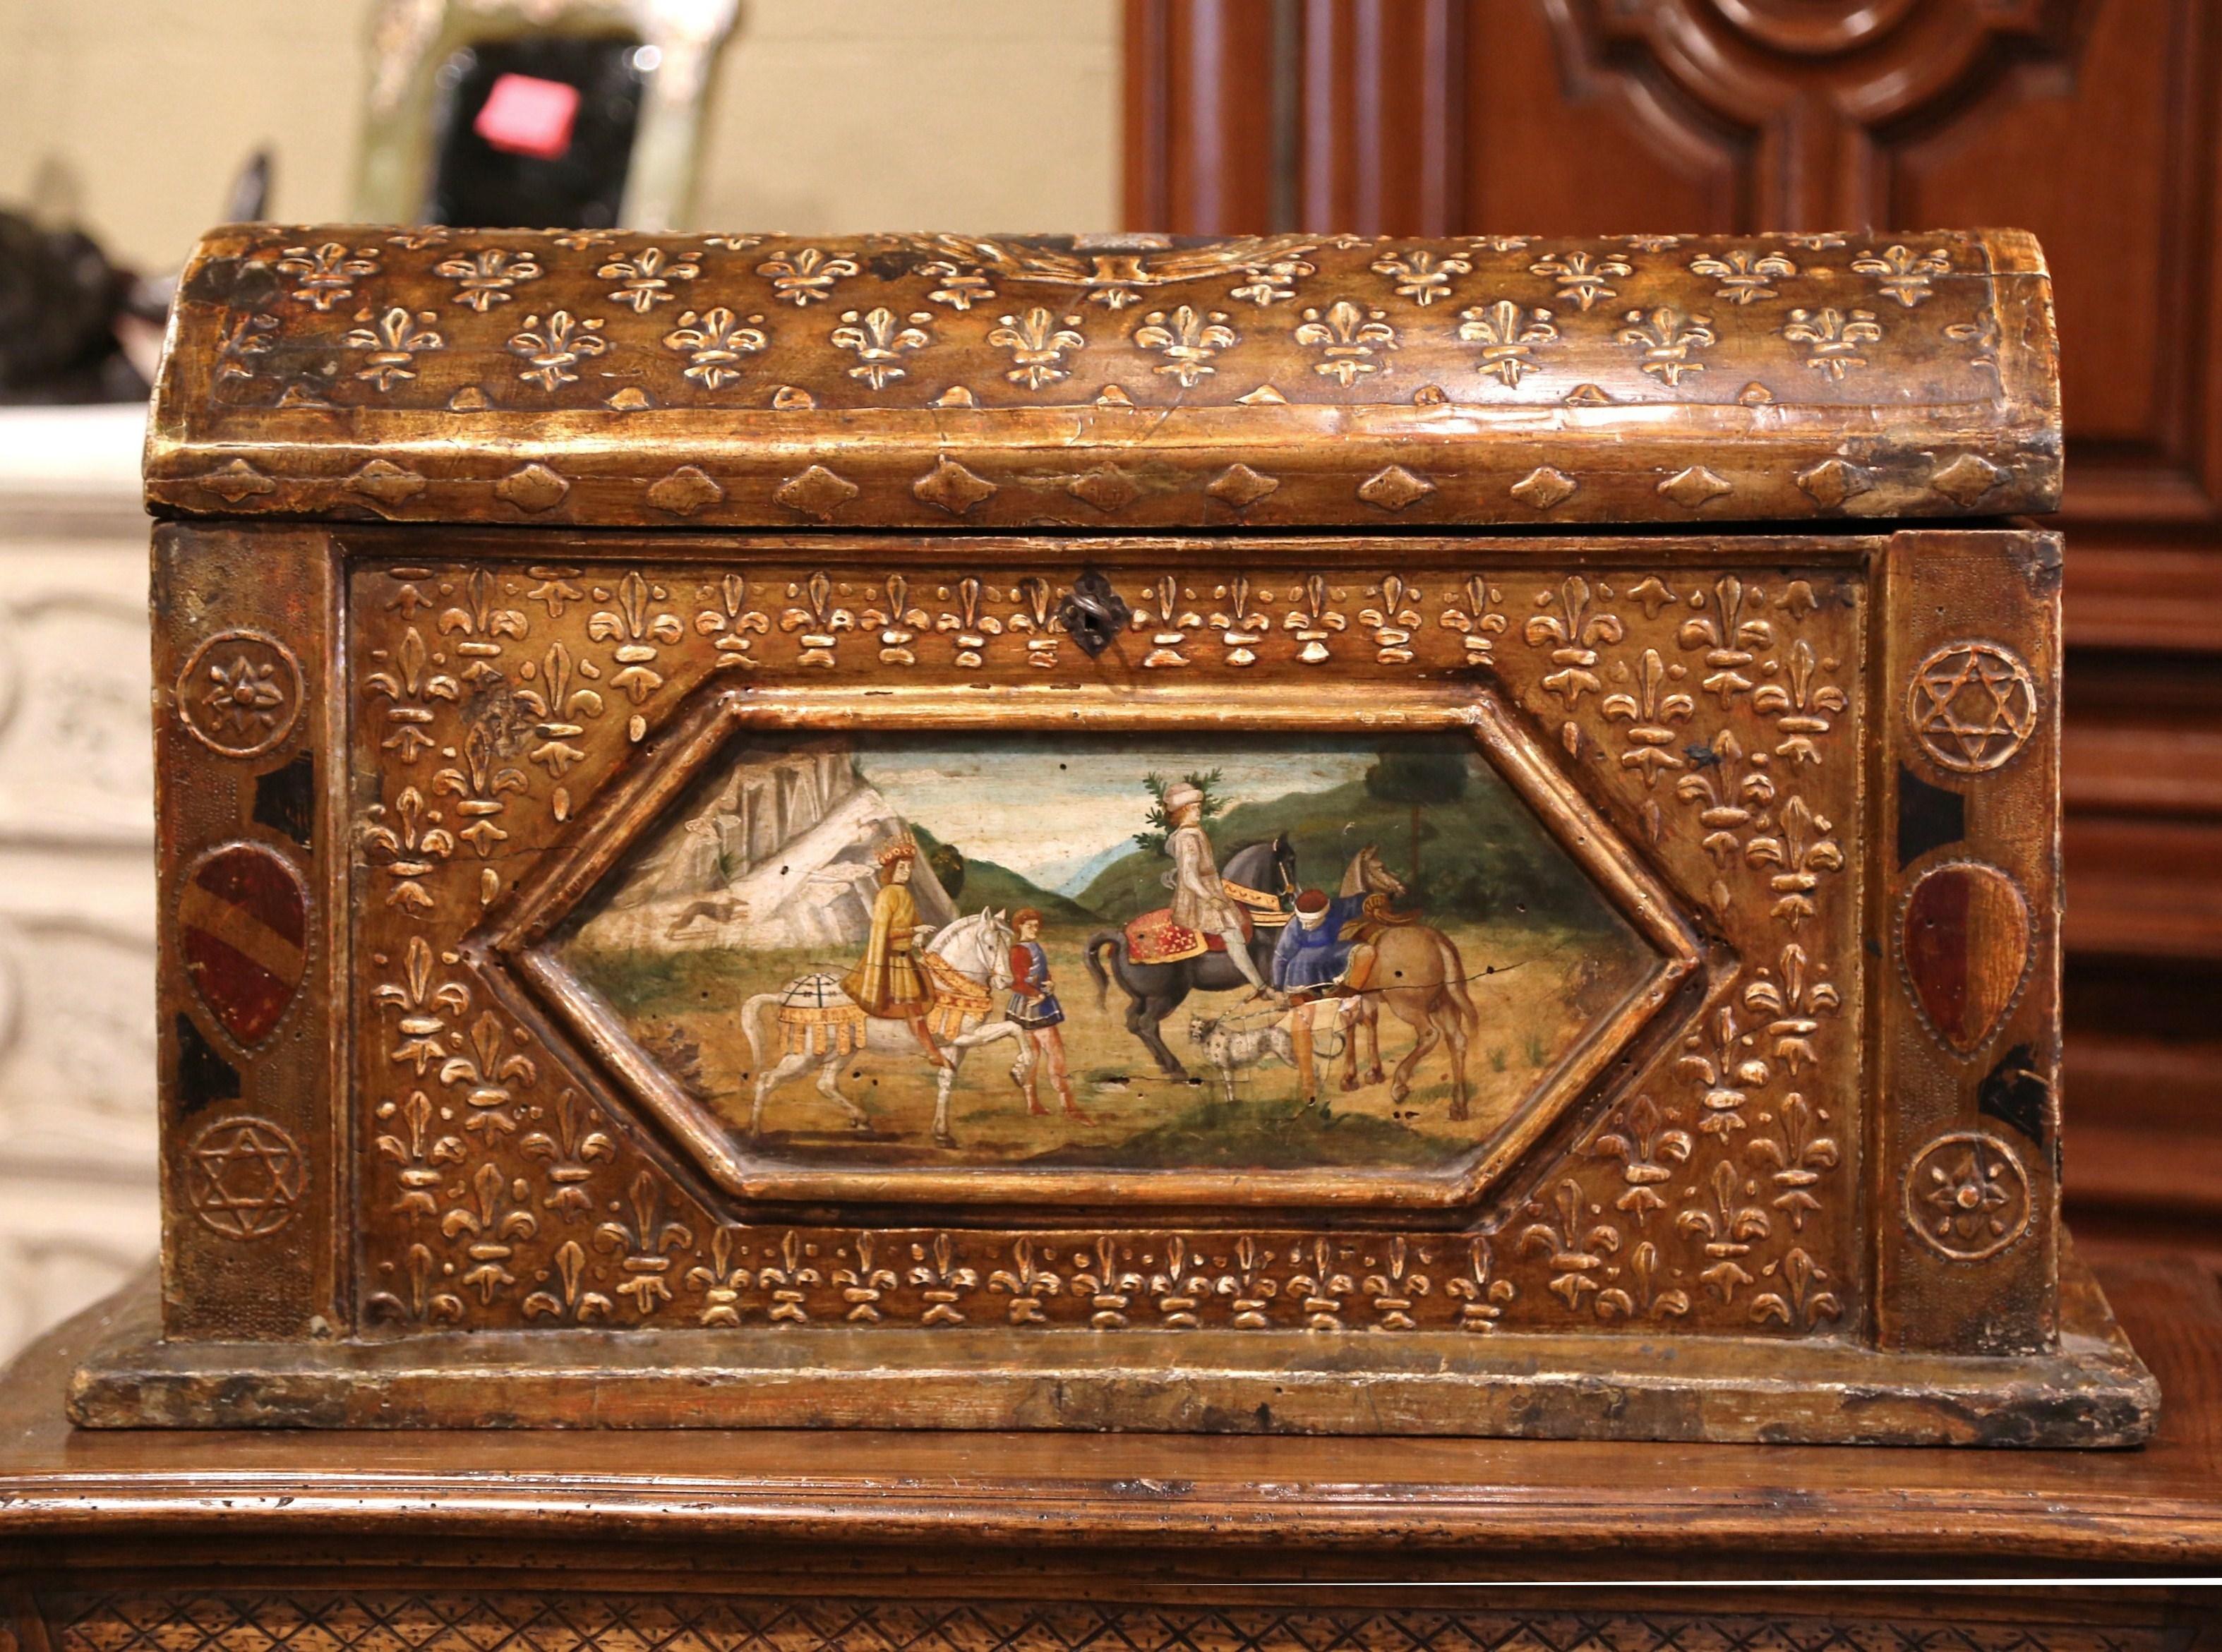 This elegant antique chest was crafted in Florence, Italy, circa 1780. Bombe in shape, the trunk is decorated with a hand painted medallion on the front depicting the 